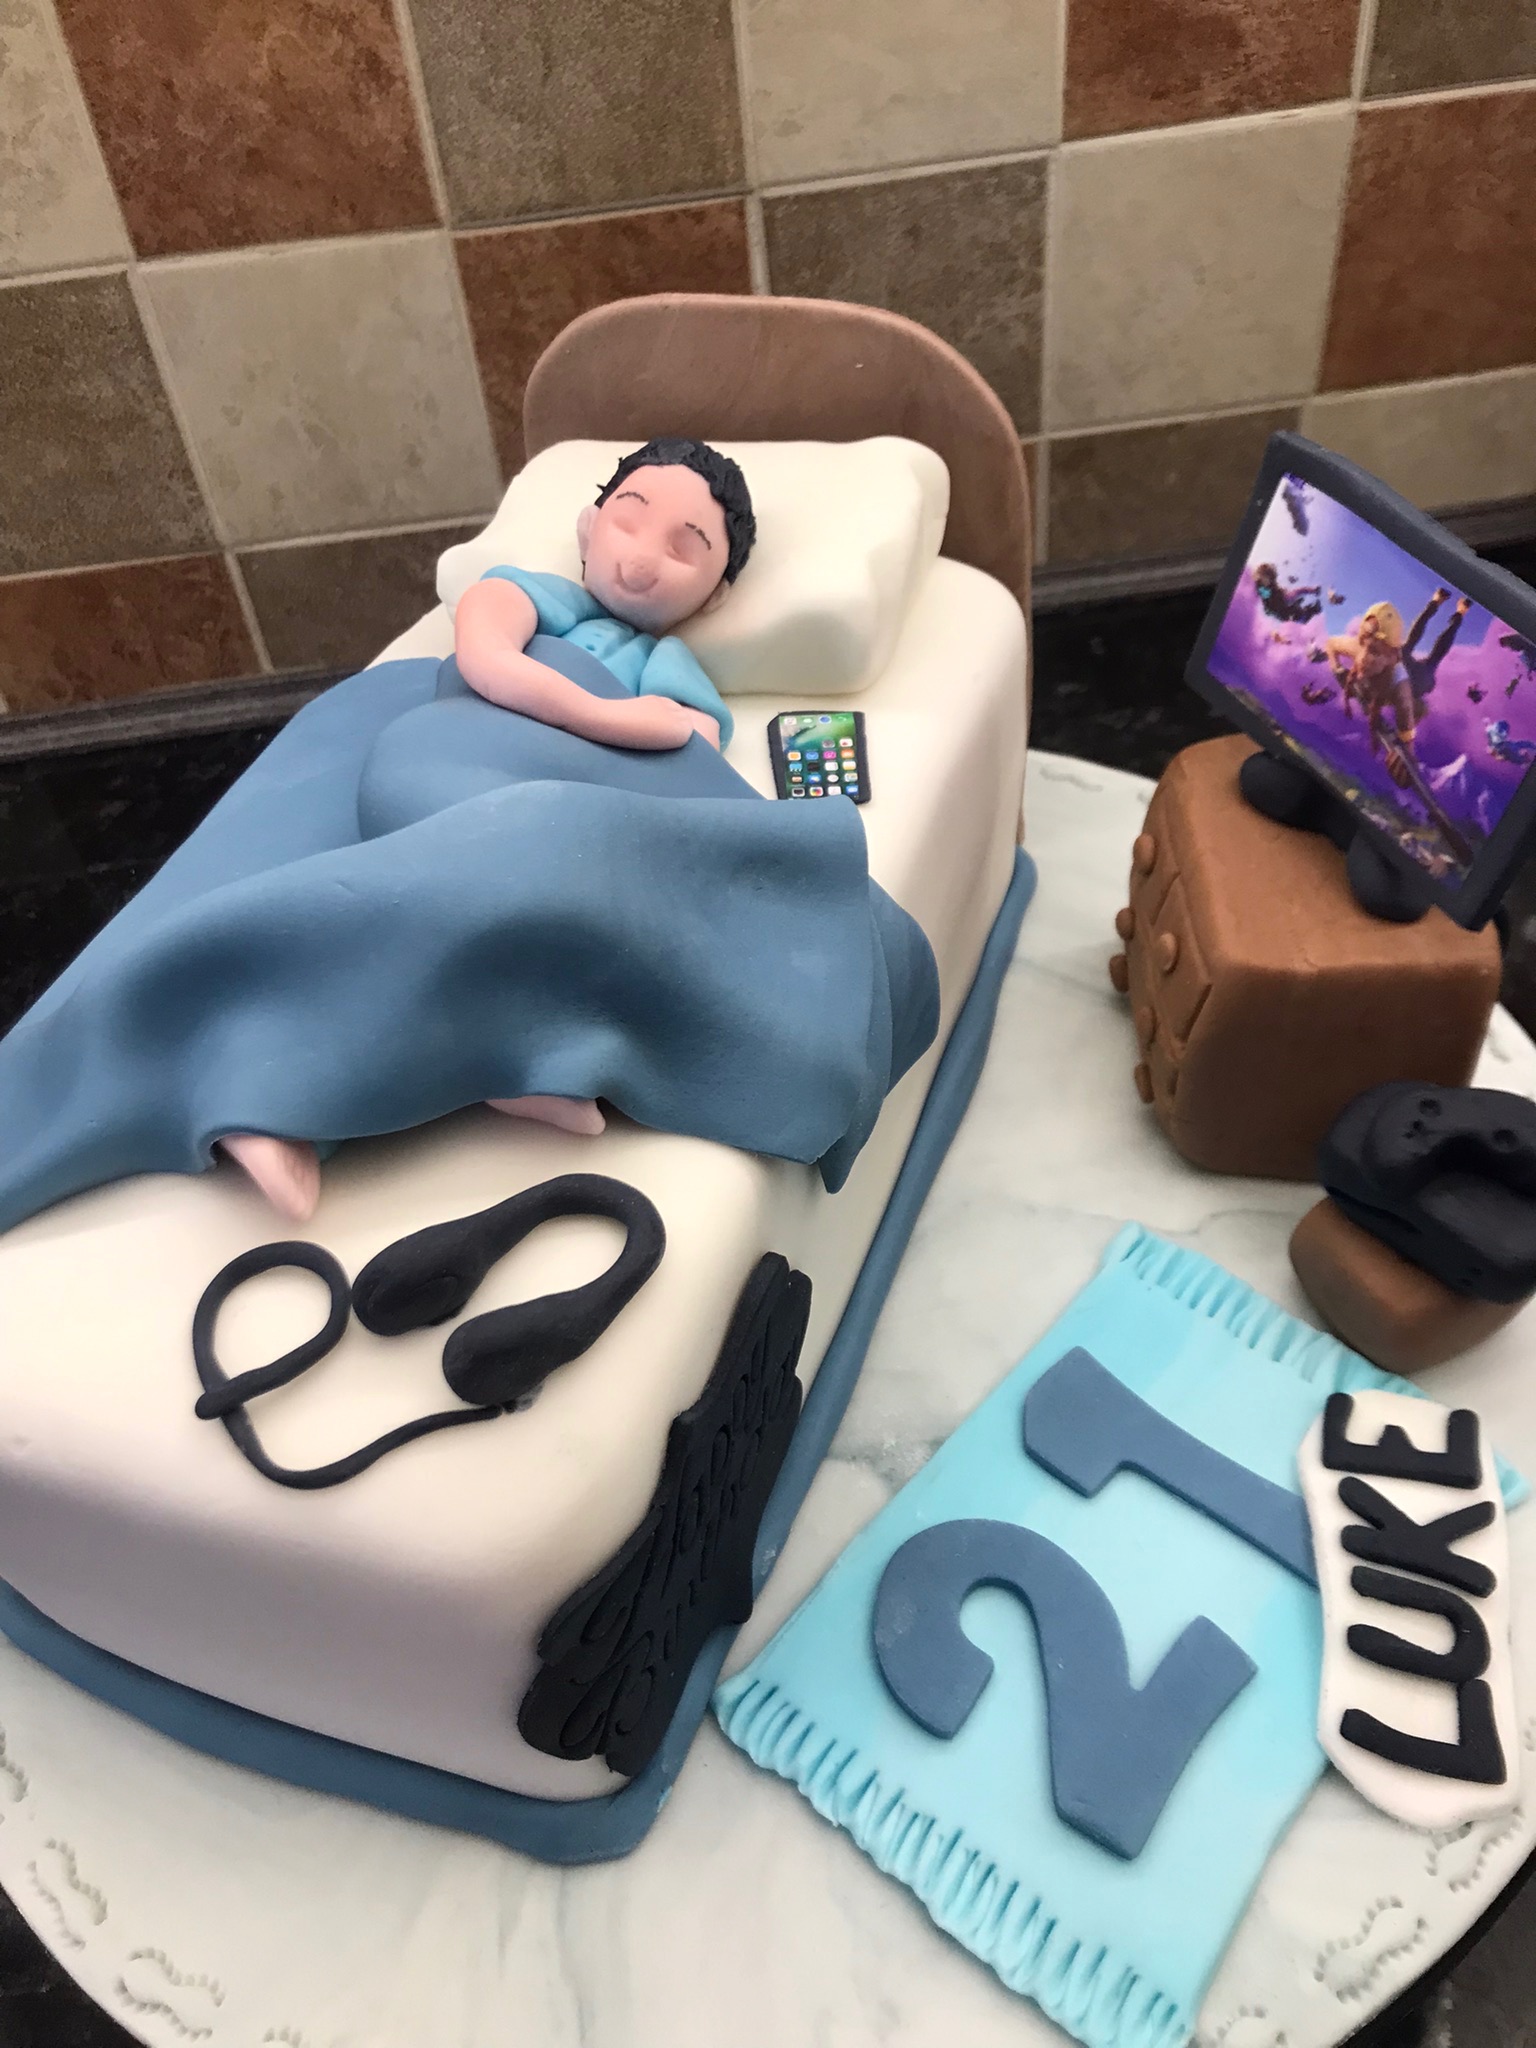 Cool Homemade 21st Birthday Cake Idea for a Guy